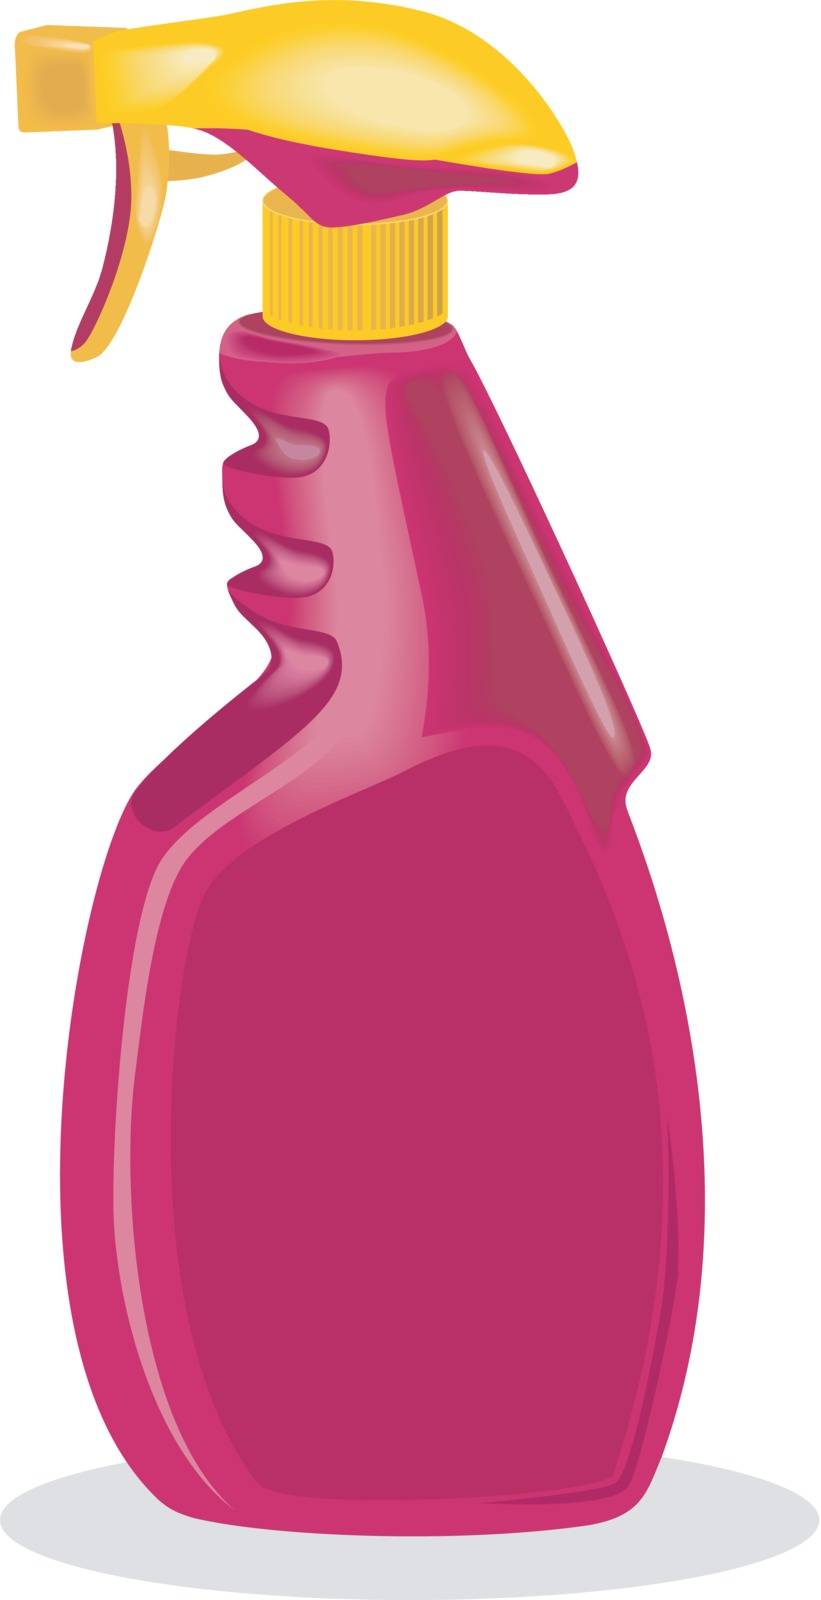 Illustration of pink spray bottle isolated on white background done in retro style. 